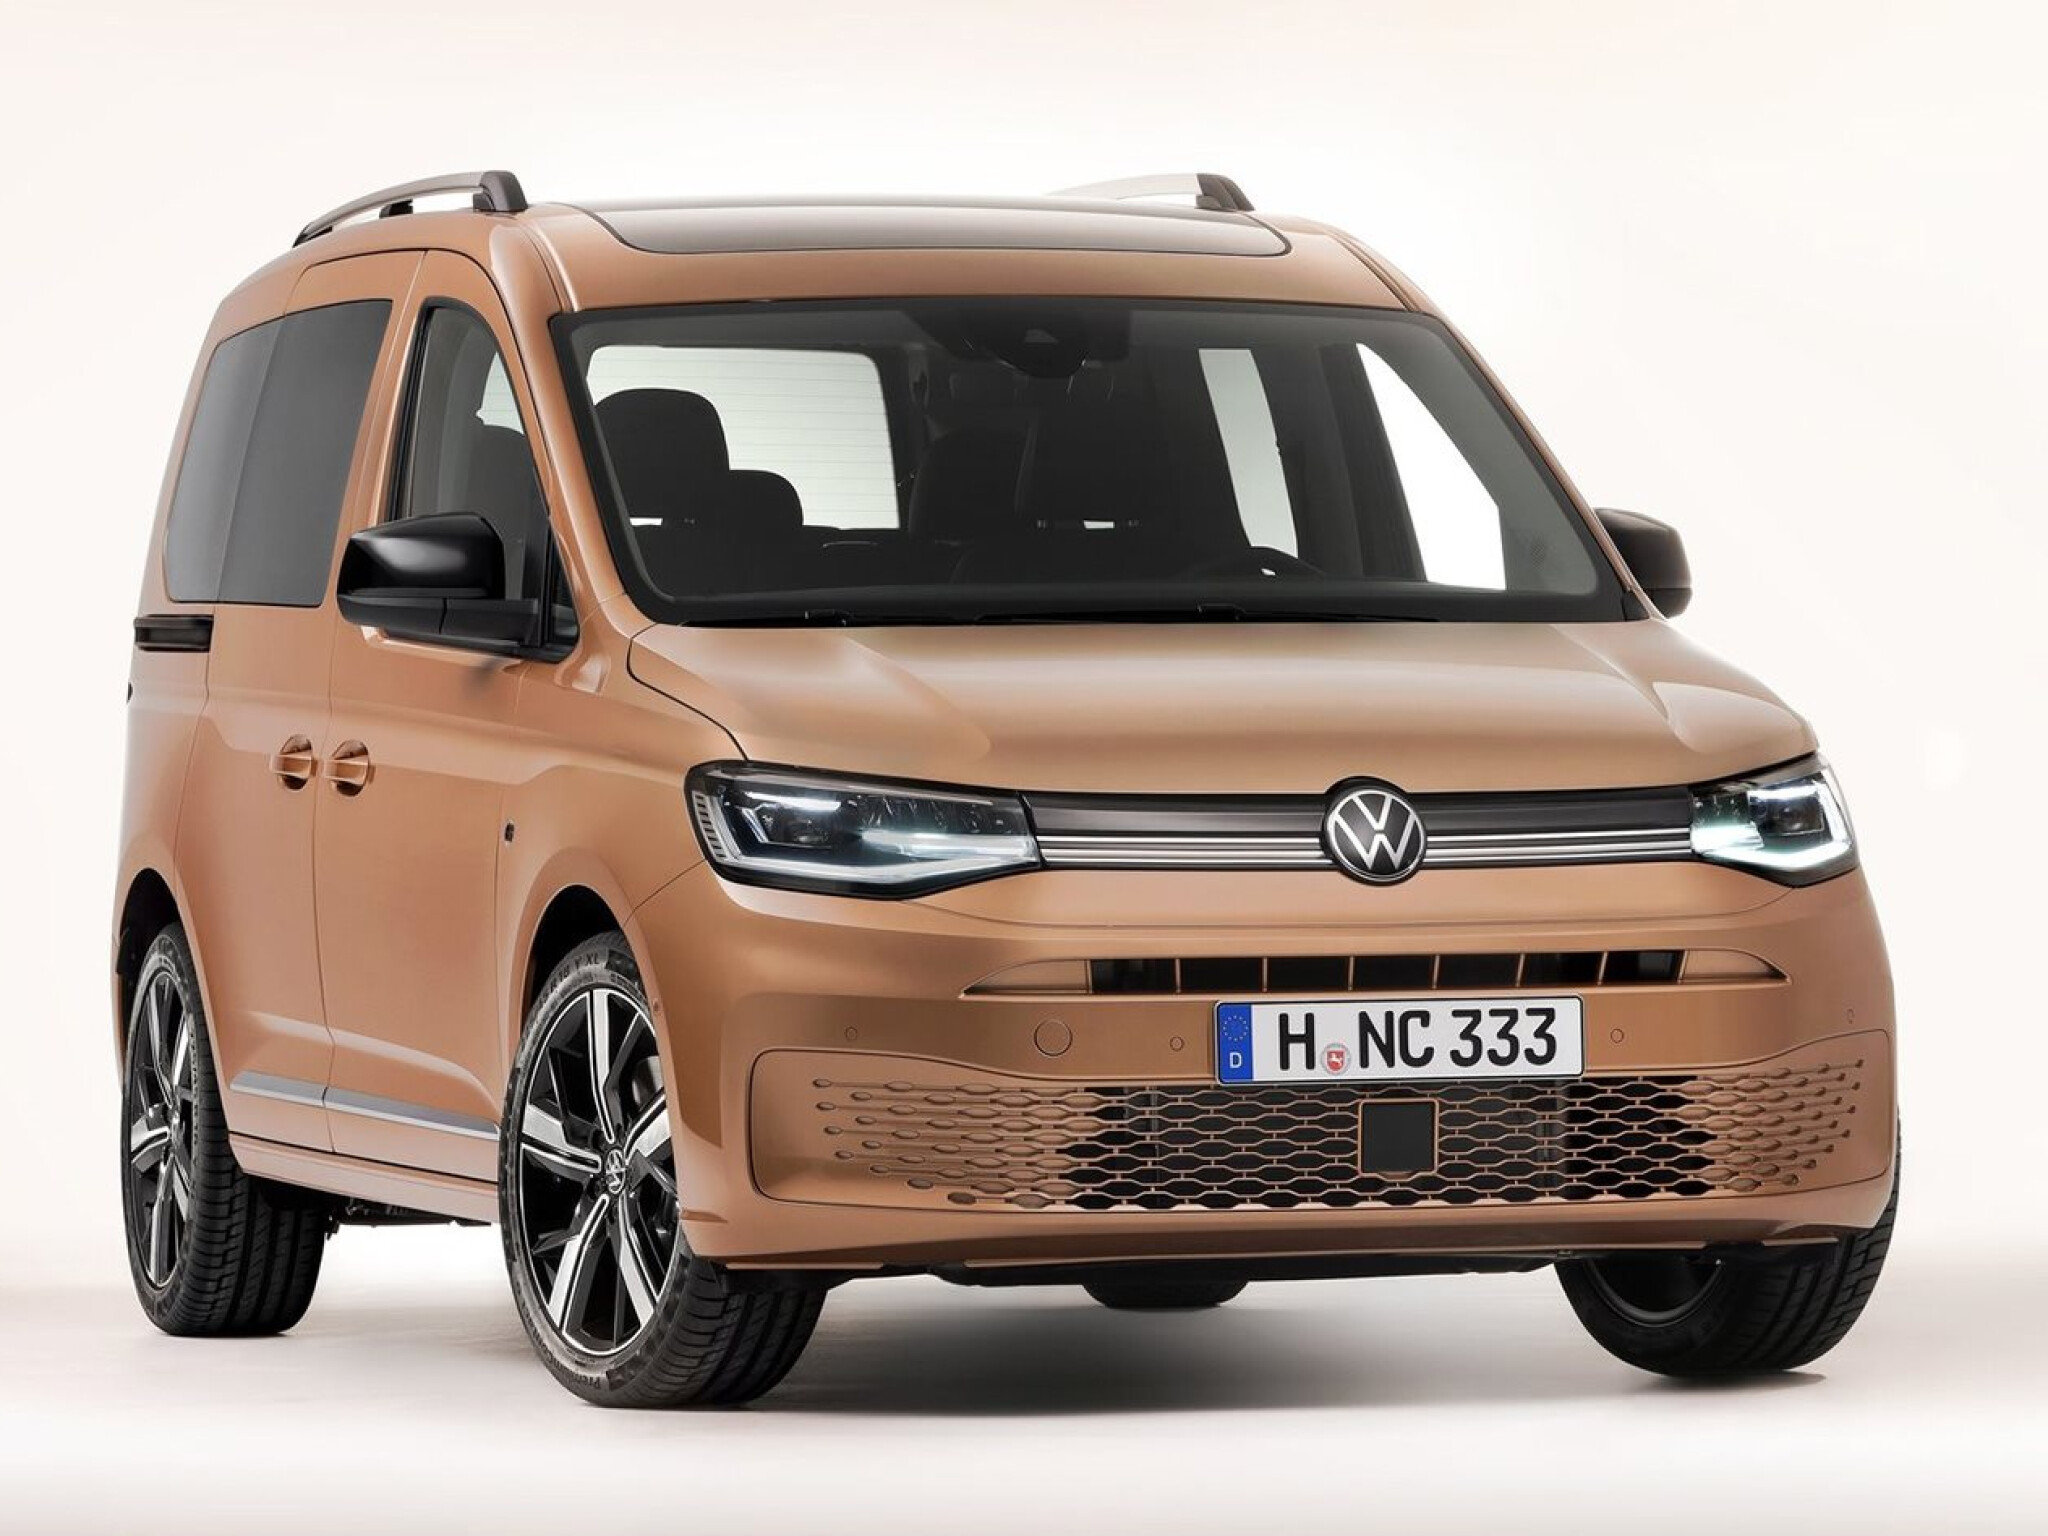 https://assets.whichcar.com.au/image/upload/s--qqLaKqQr--/c_fill,f_auto,q_auto:good/t_p_4x3/v1/archive/whichcar/2020/02/21/-1/Volkswagen-Caddy-front.jpg